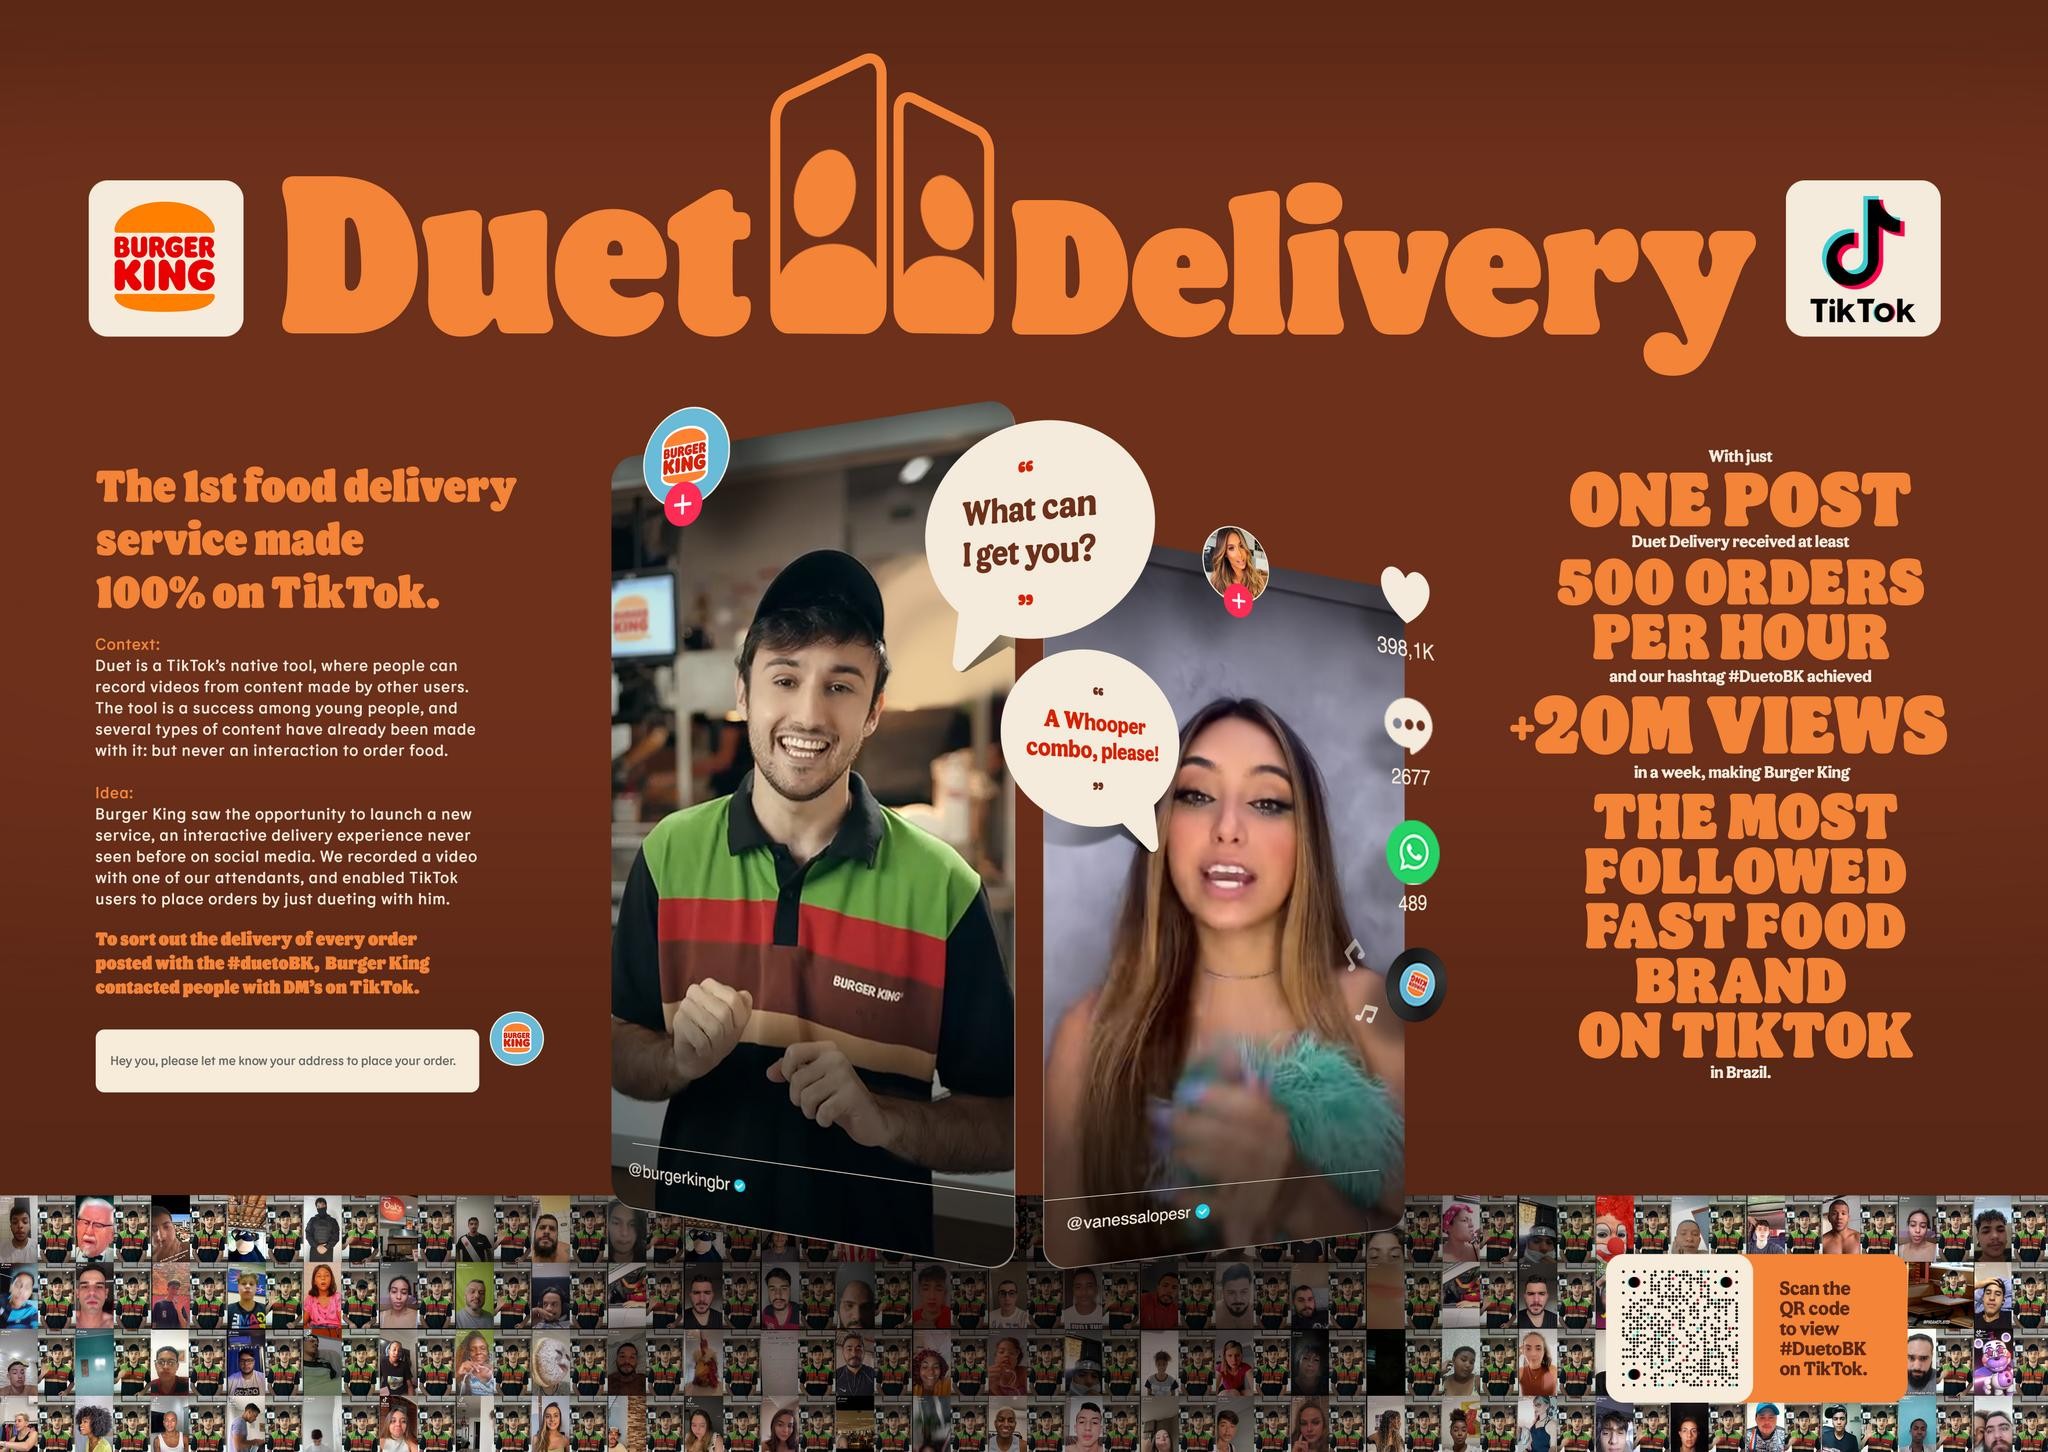 Duet Delivery